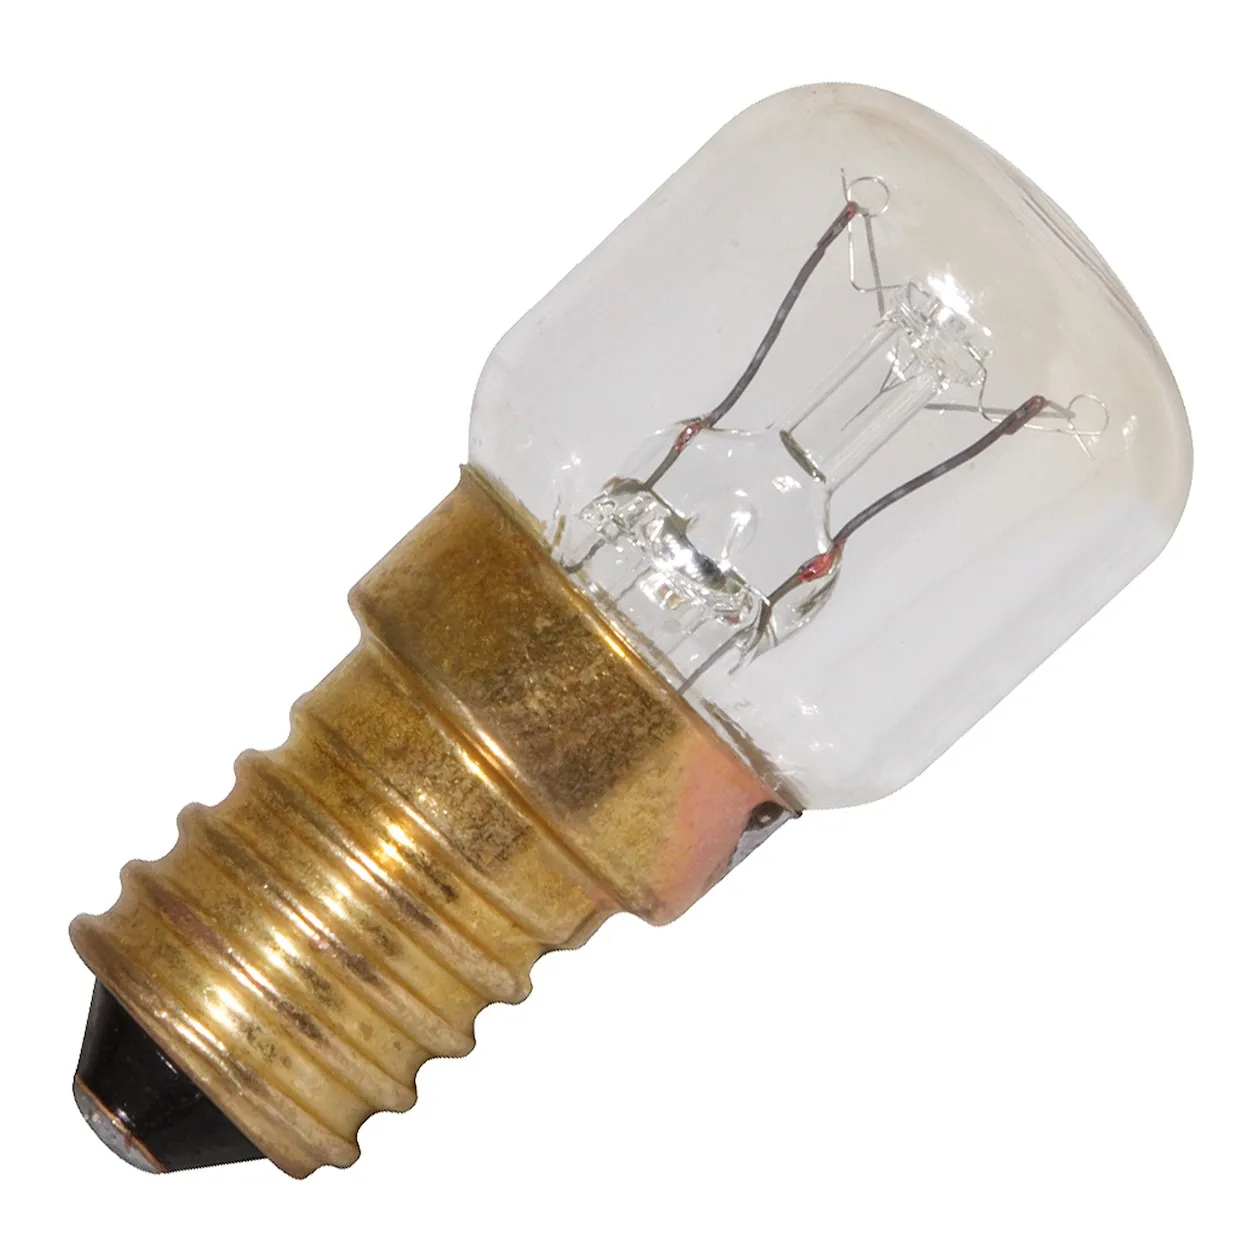 Scanpart ovenlamp E14 25W 300 graden buis 190Lm 2-pack